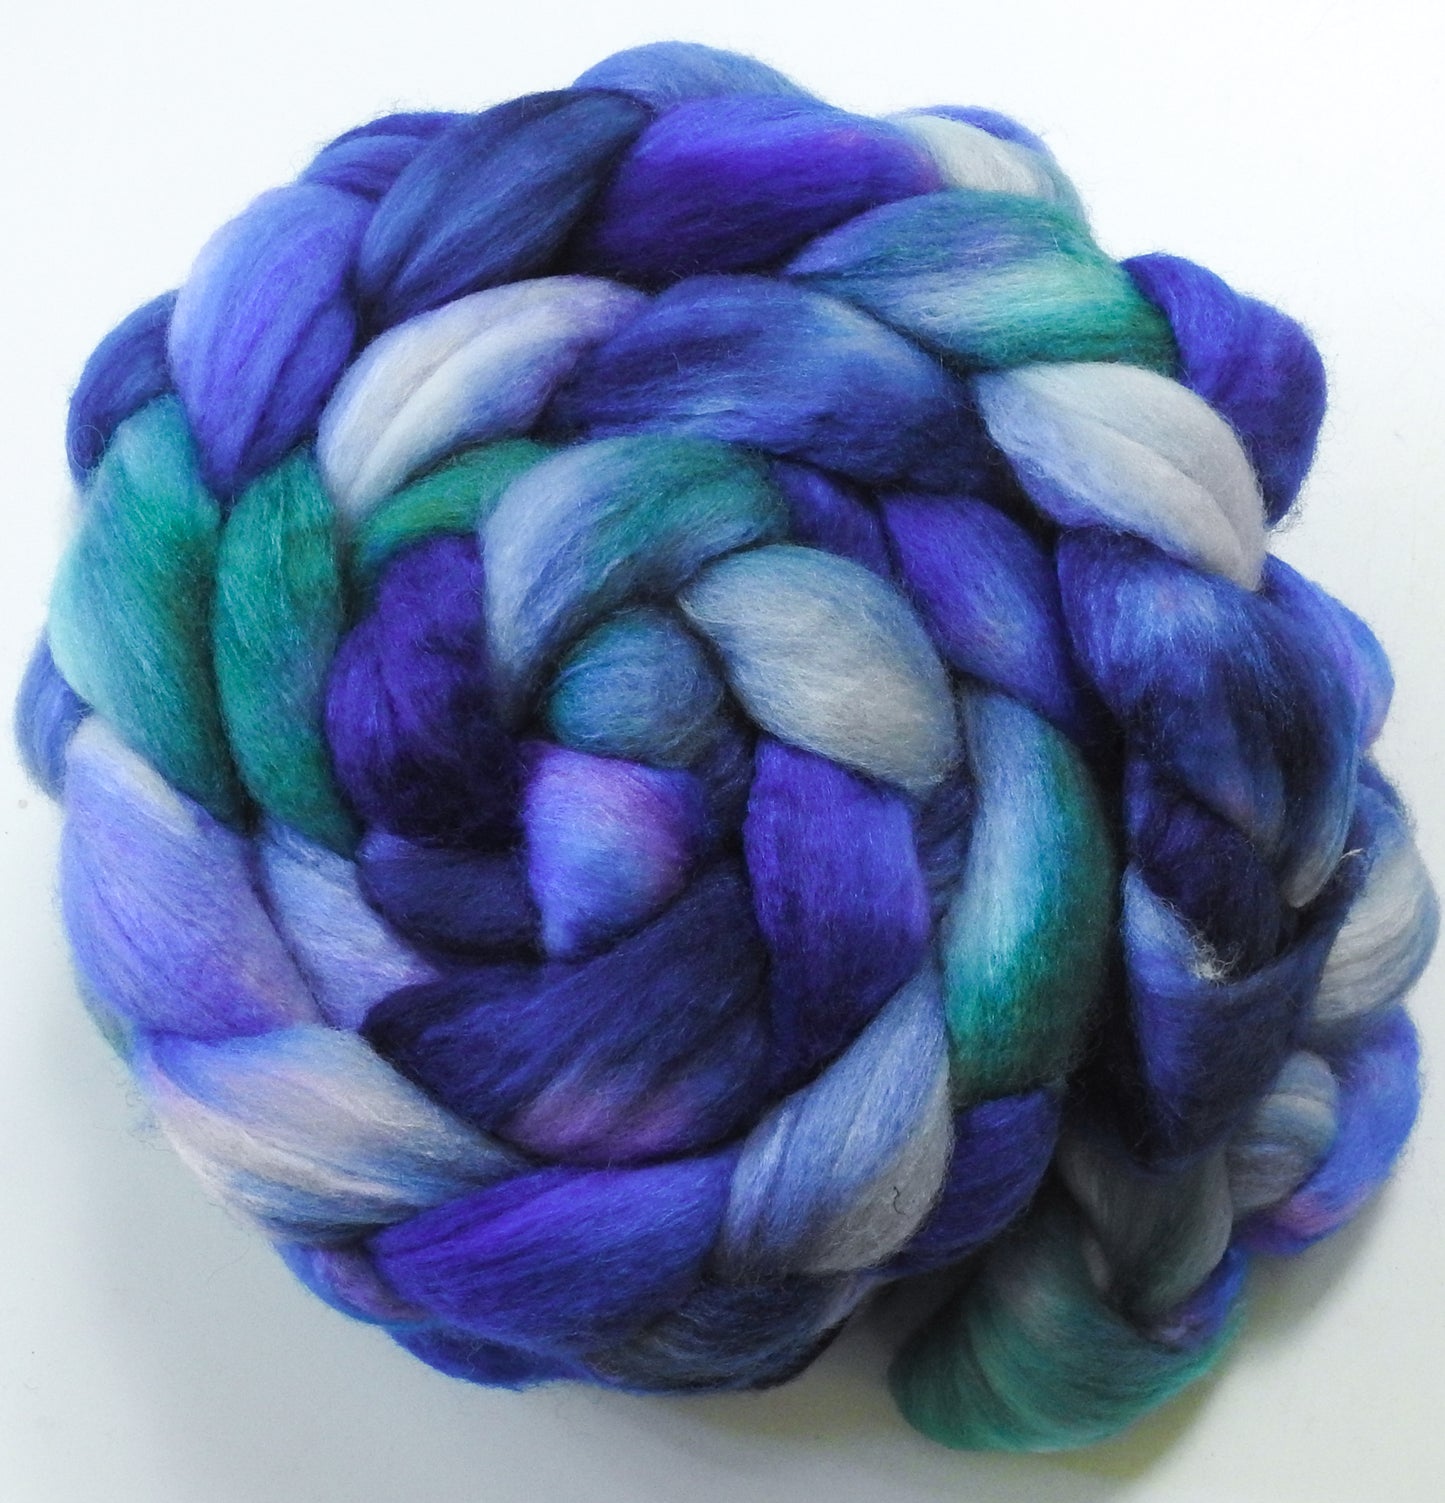 Rocket Science (5.7 oz) - Blue-faced Leicester/ Tussah Silk (75/25)